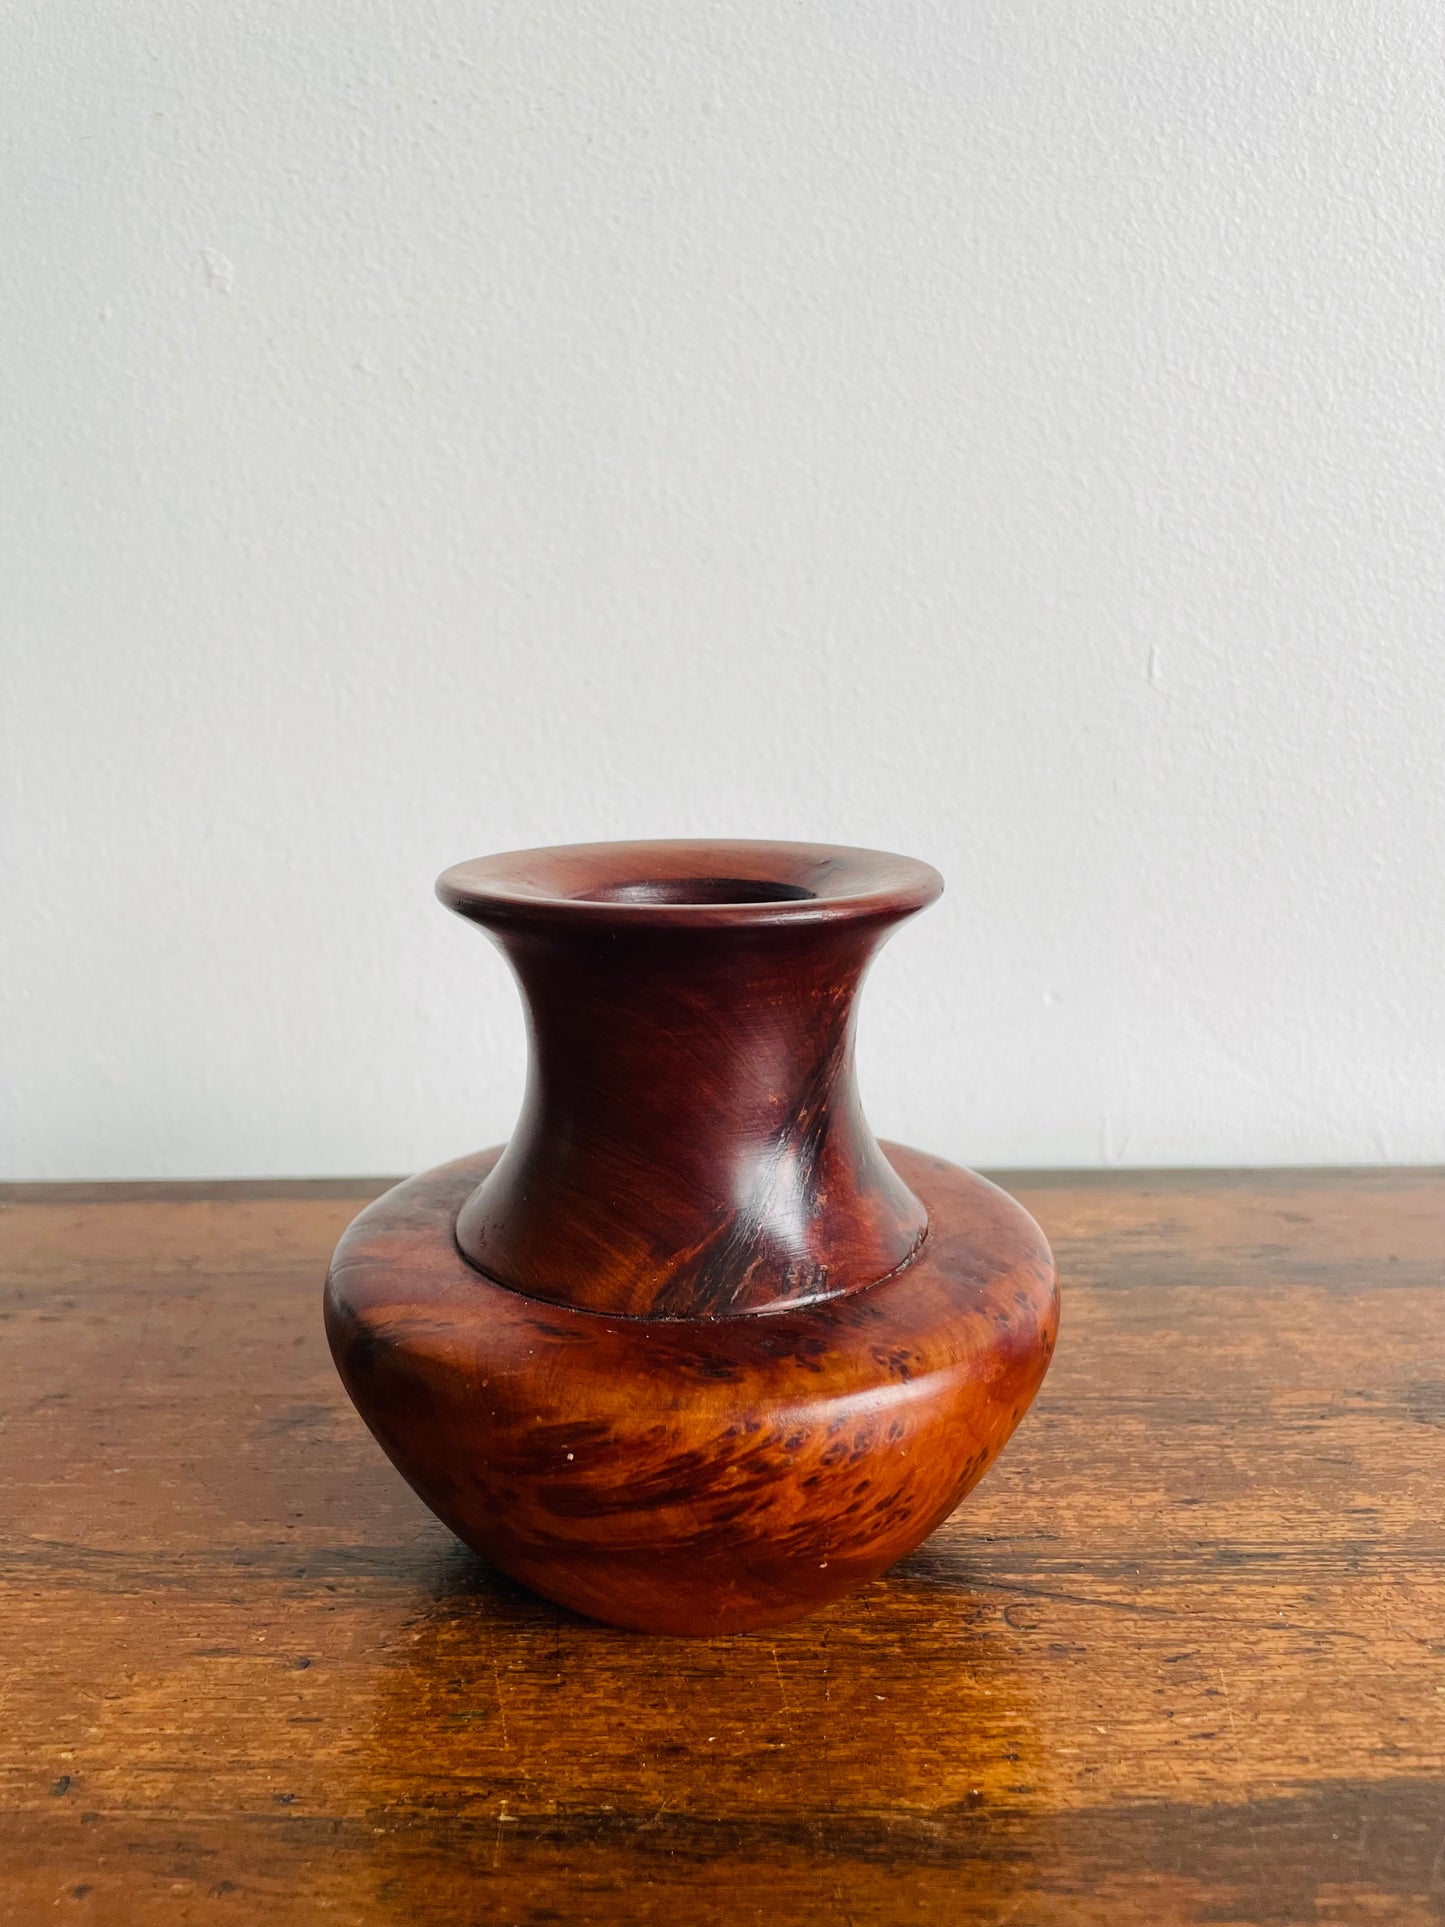 Beautiful Solid & Smooth Hand Turned Wood Vase with Drainage Holes at Bottom